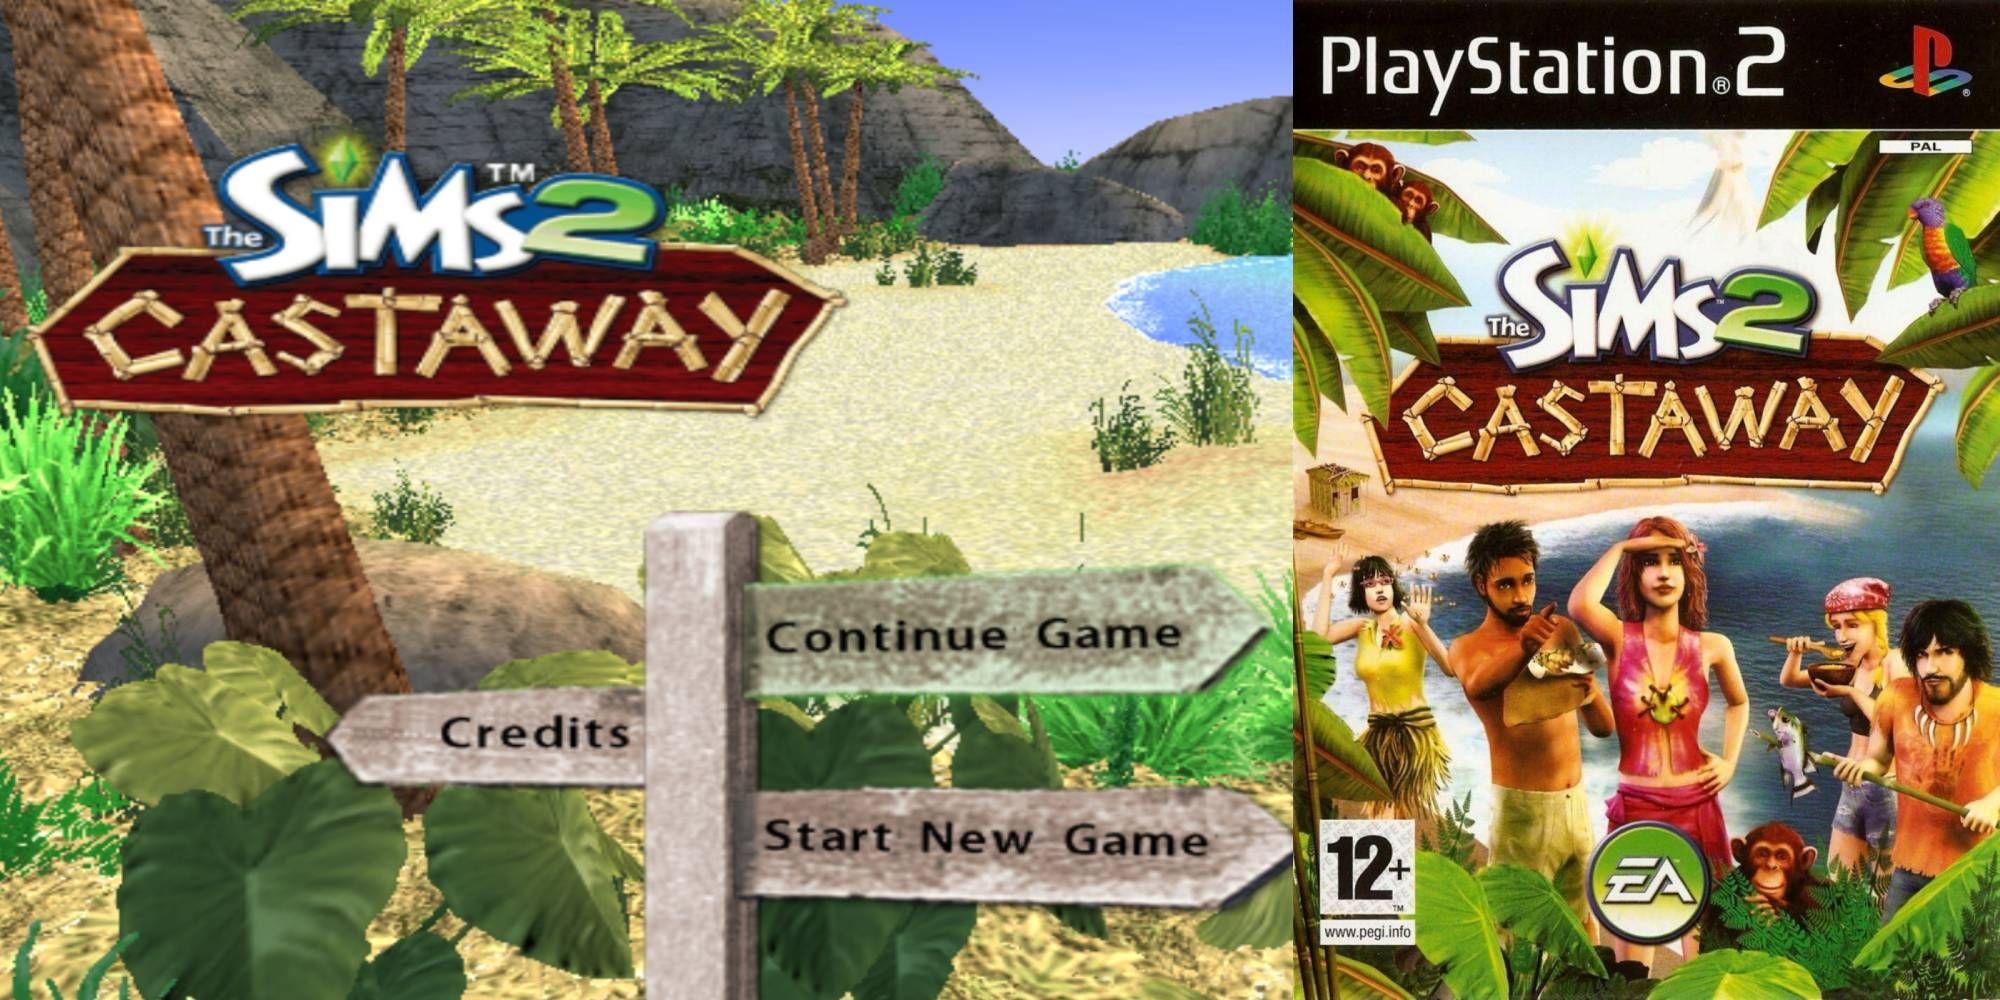 The in game menu for The Sims 2 Castaway next to the cover art